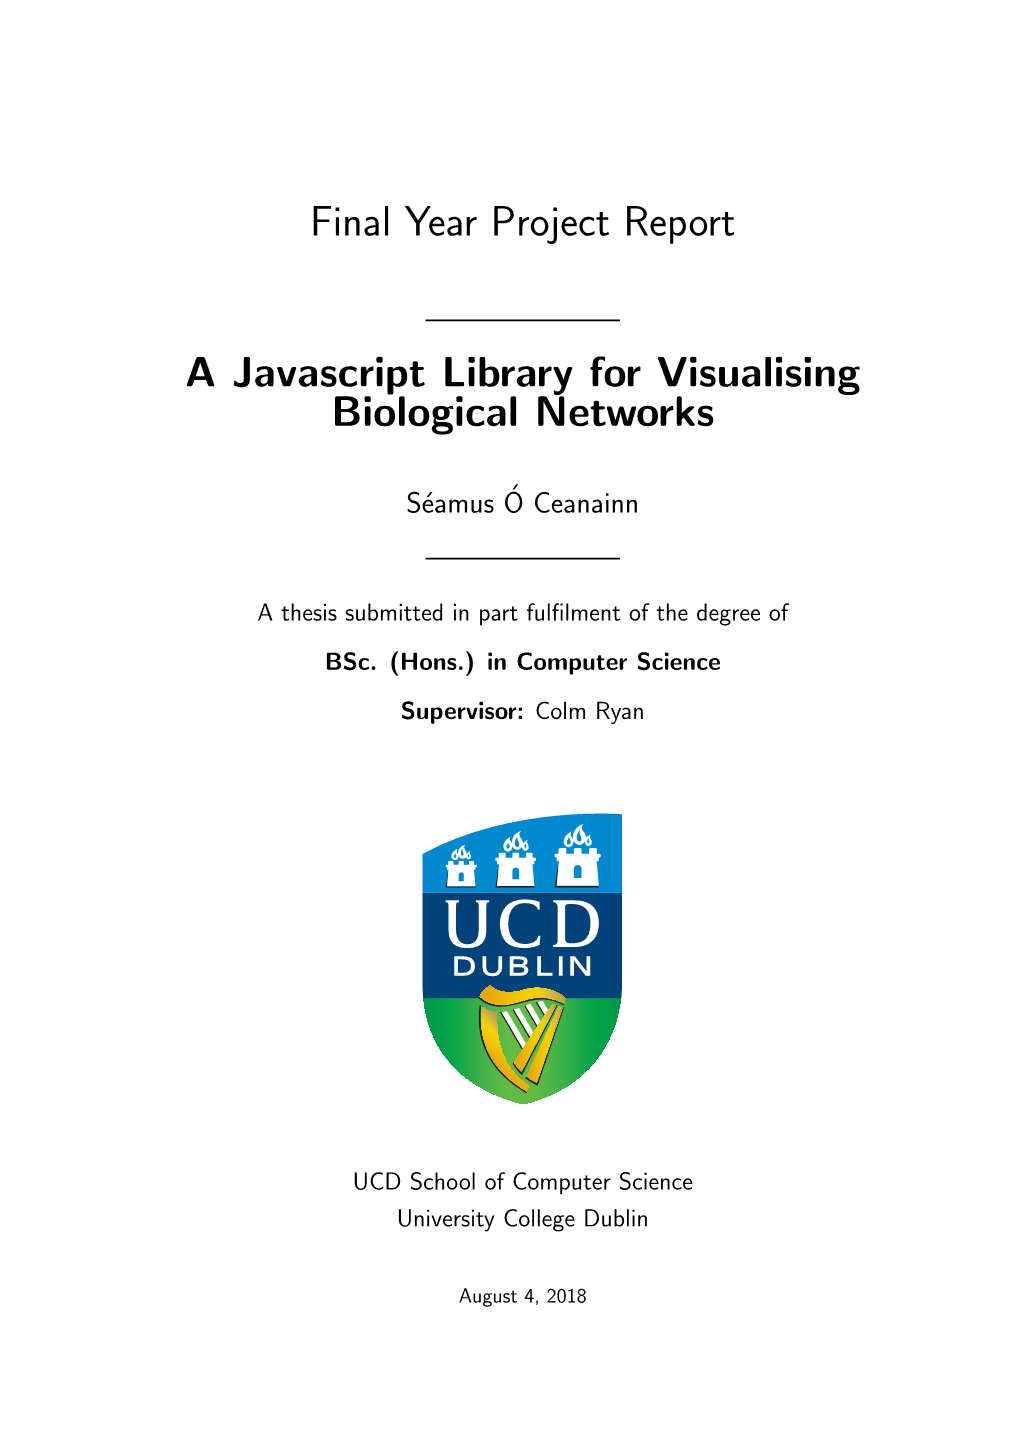 Final Year Project Report a Javascript Library for Visualising Biological